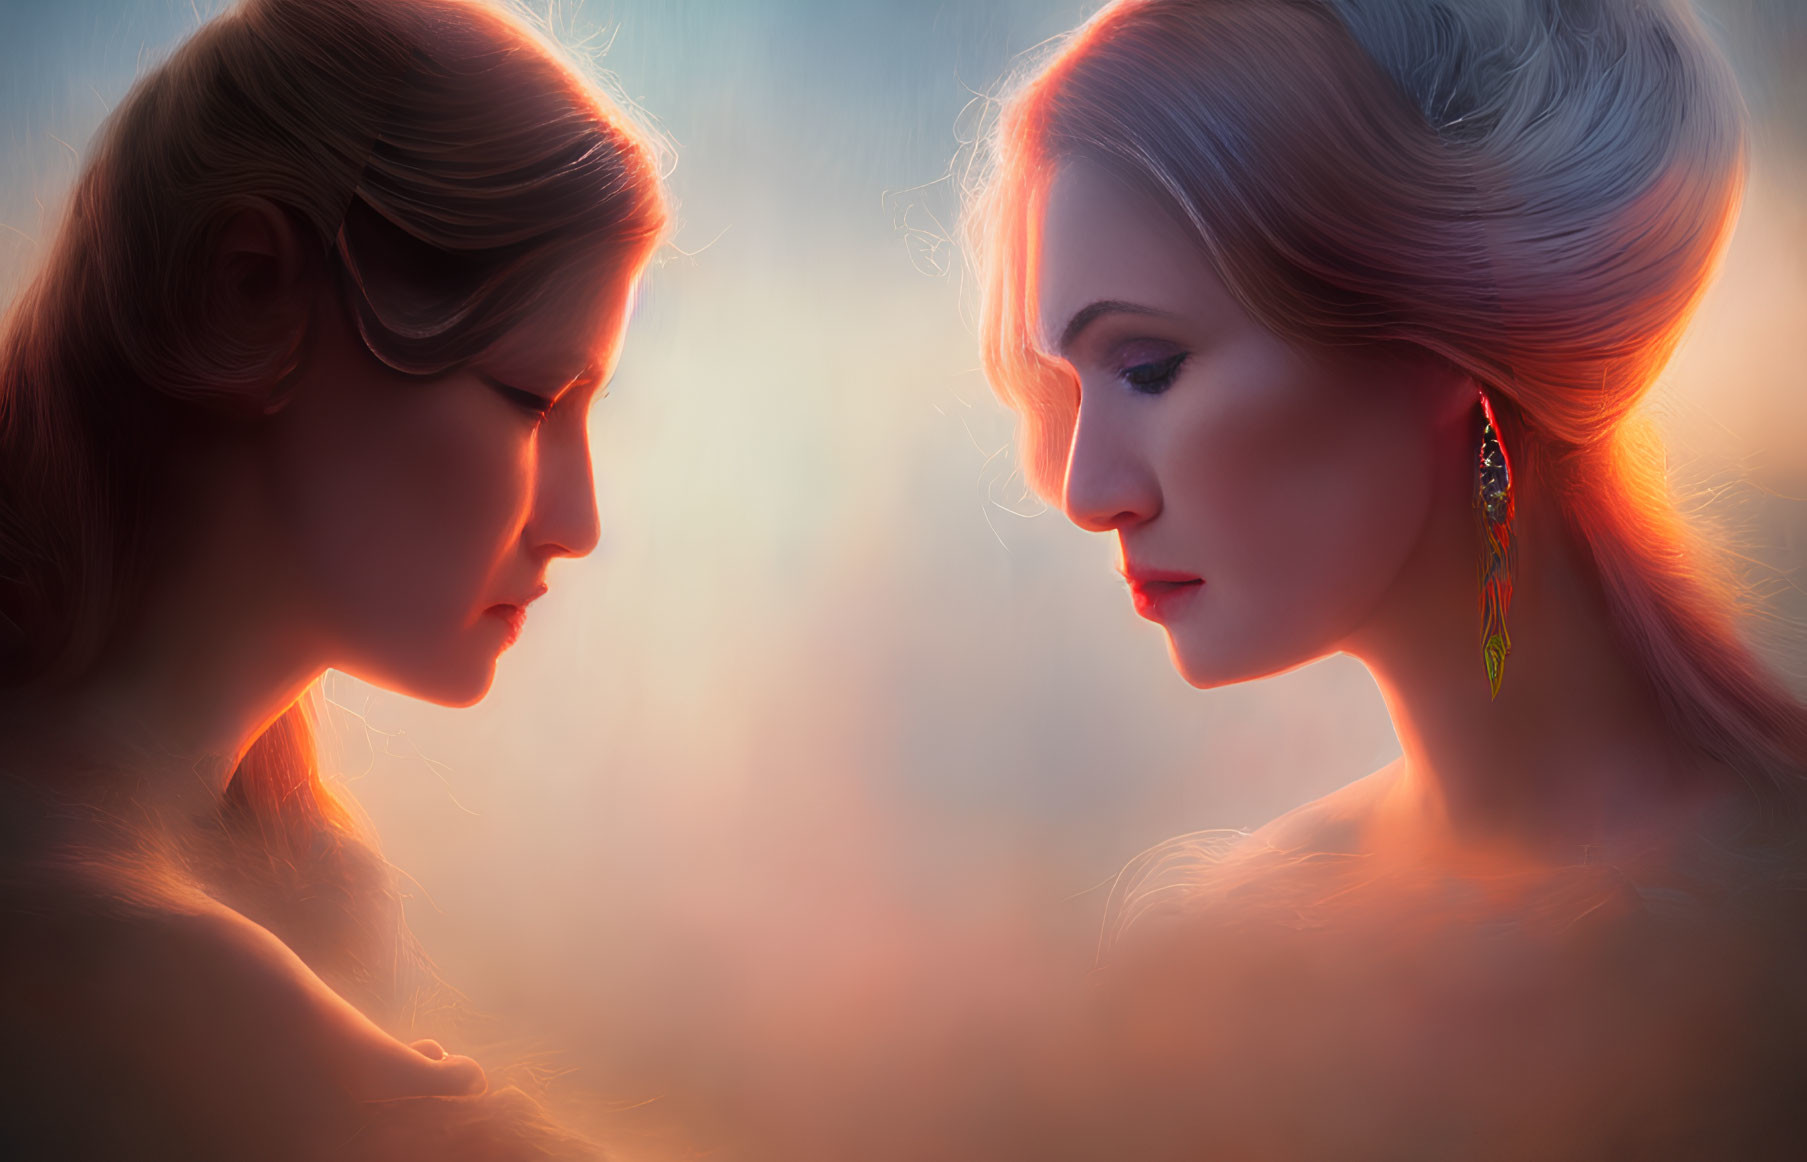 Two women in profile under soft, warm glow, one with intricate earring